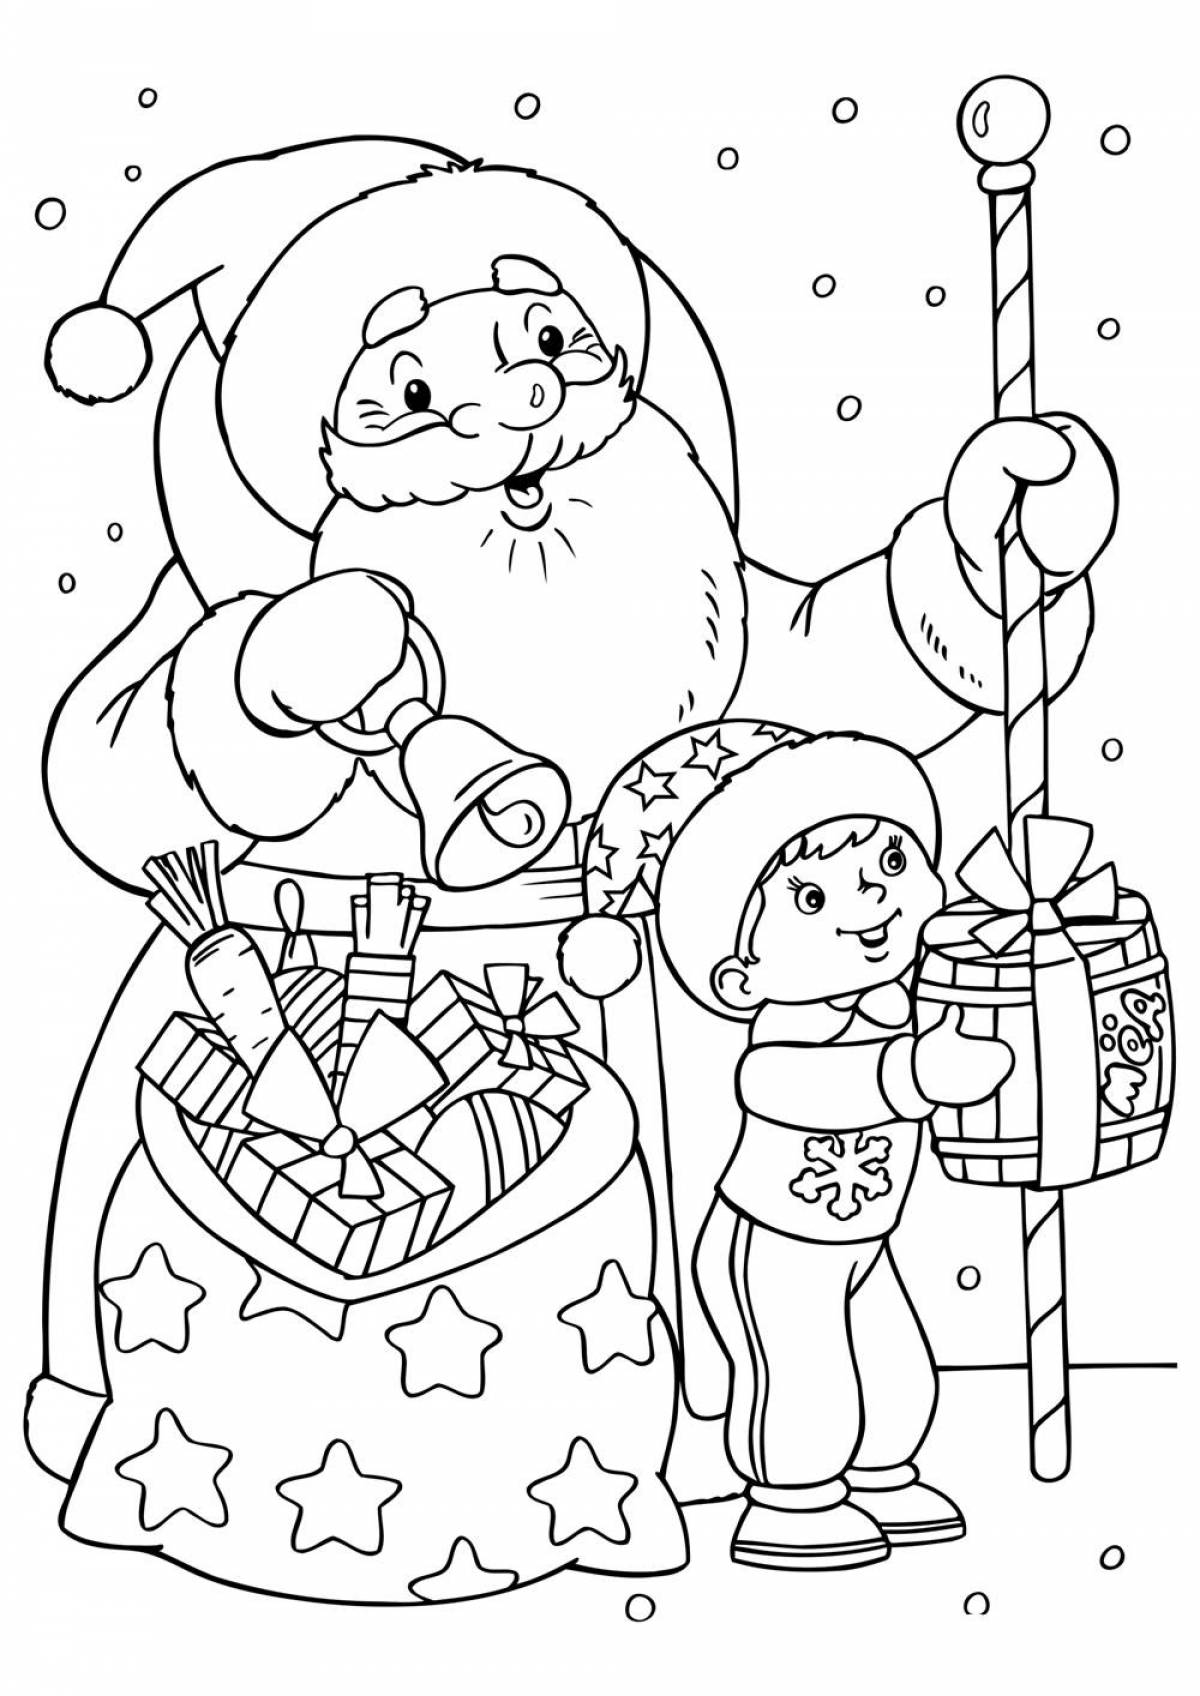 Decorated Christmas coloring book